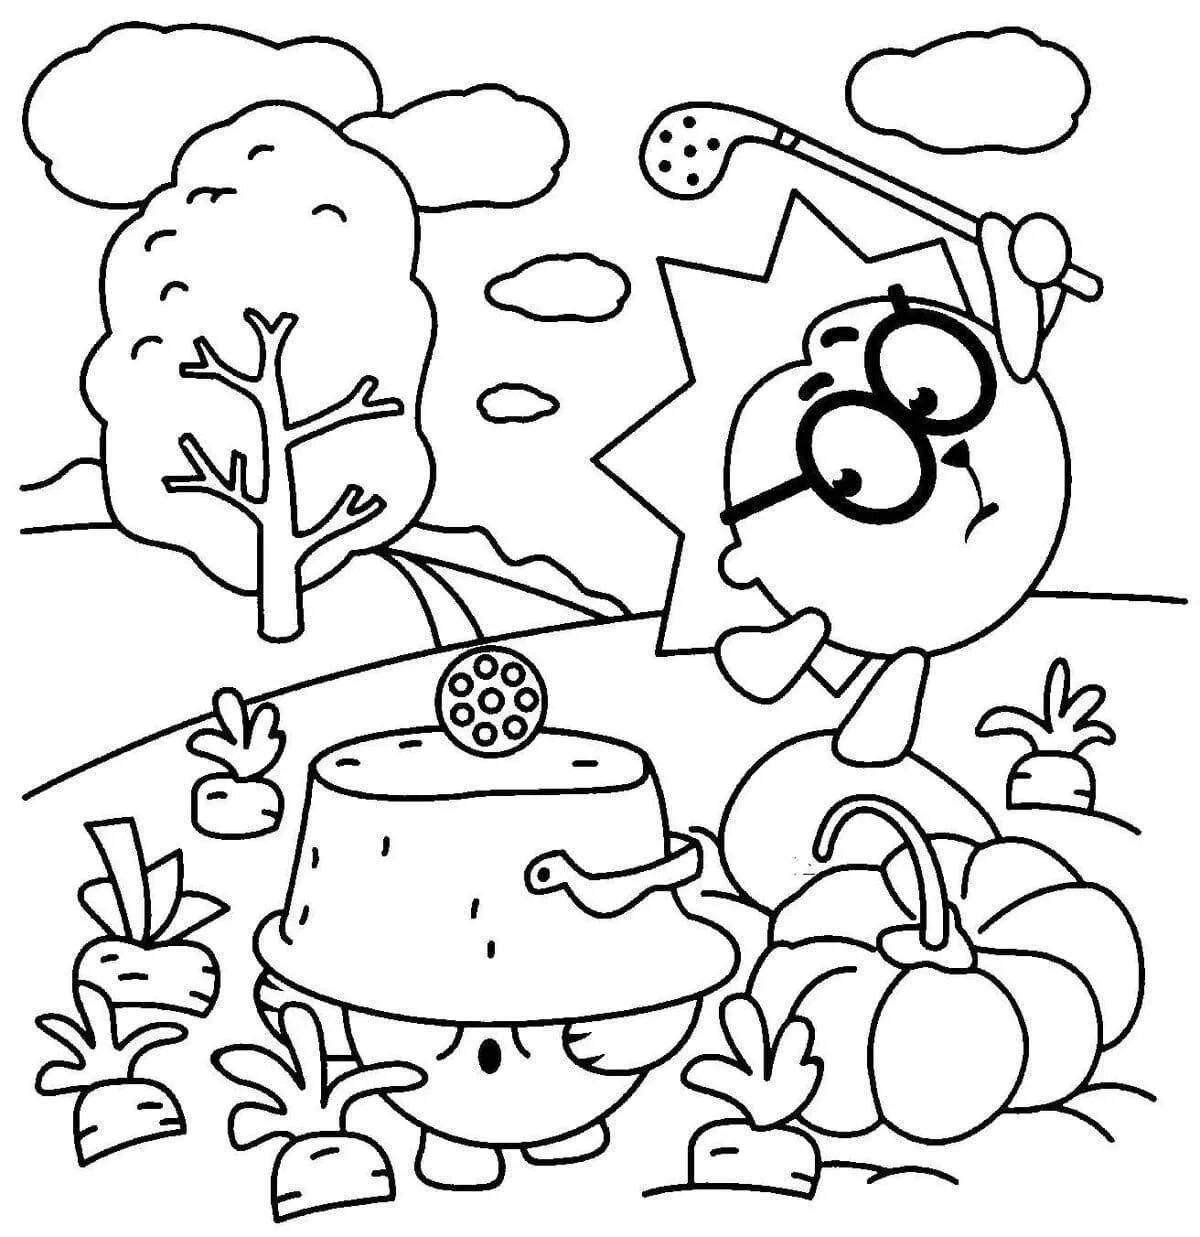 Color-frenzy coloring page for children 6-10 years old